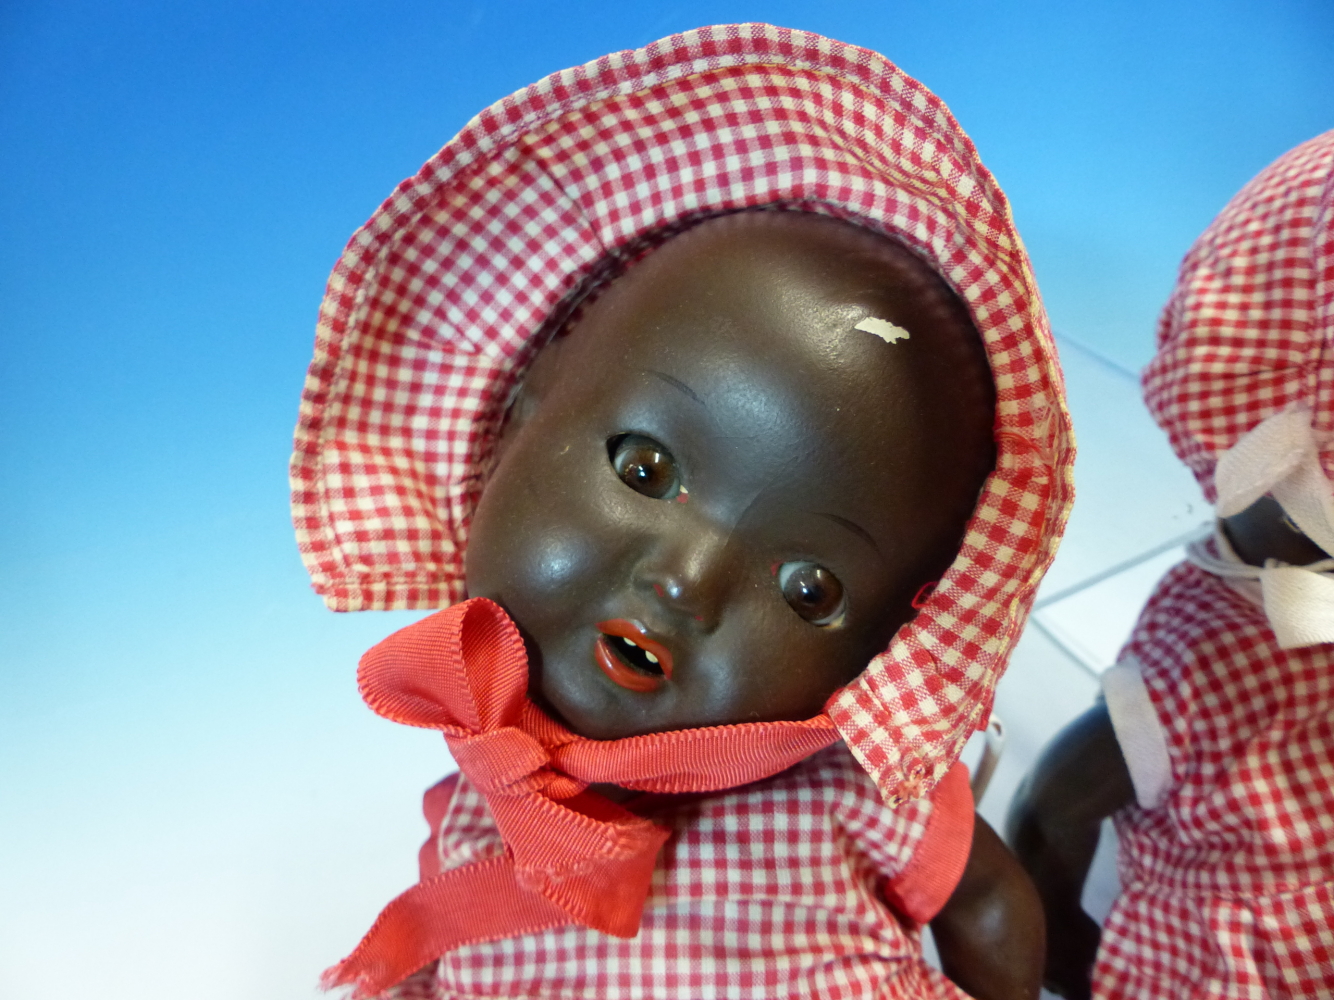 TWO SIMILAR ARMAND MARSEILLE BLACK DOLLS IN RED GINGHAM DRESSES AND BONNETS. H 27cms. - Image 4 of 7